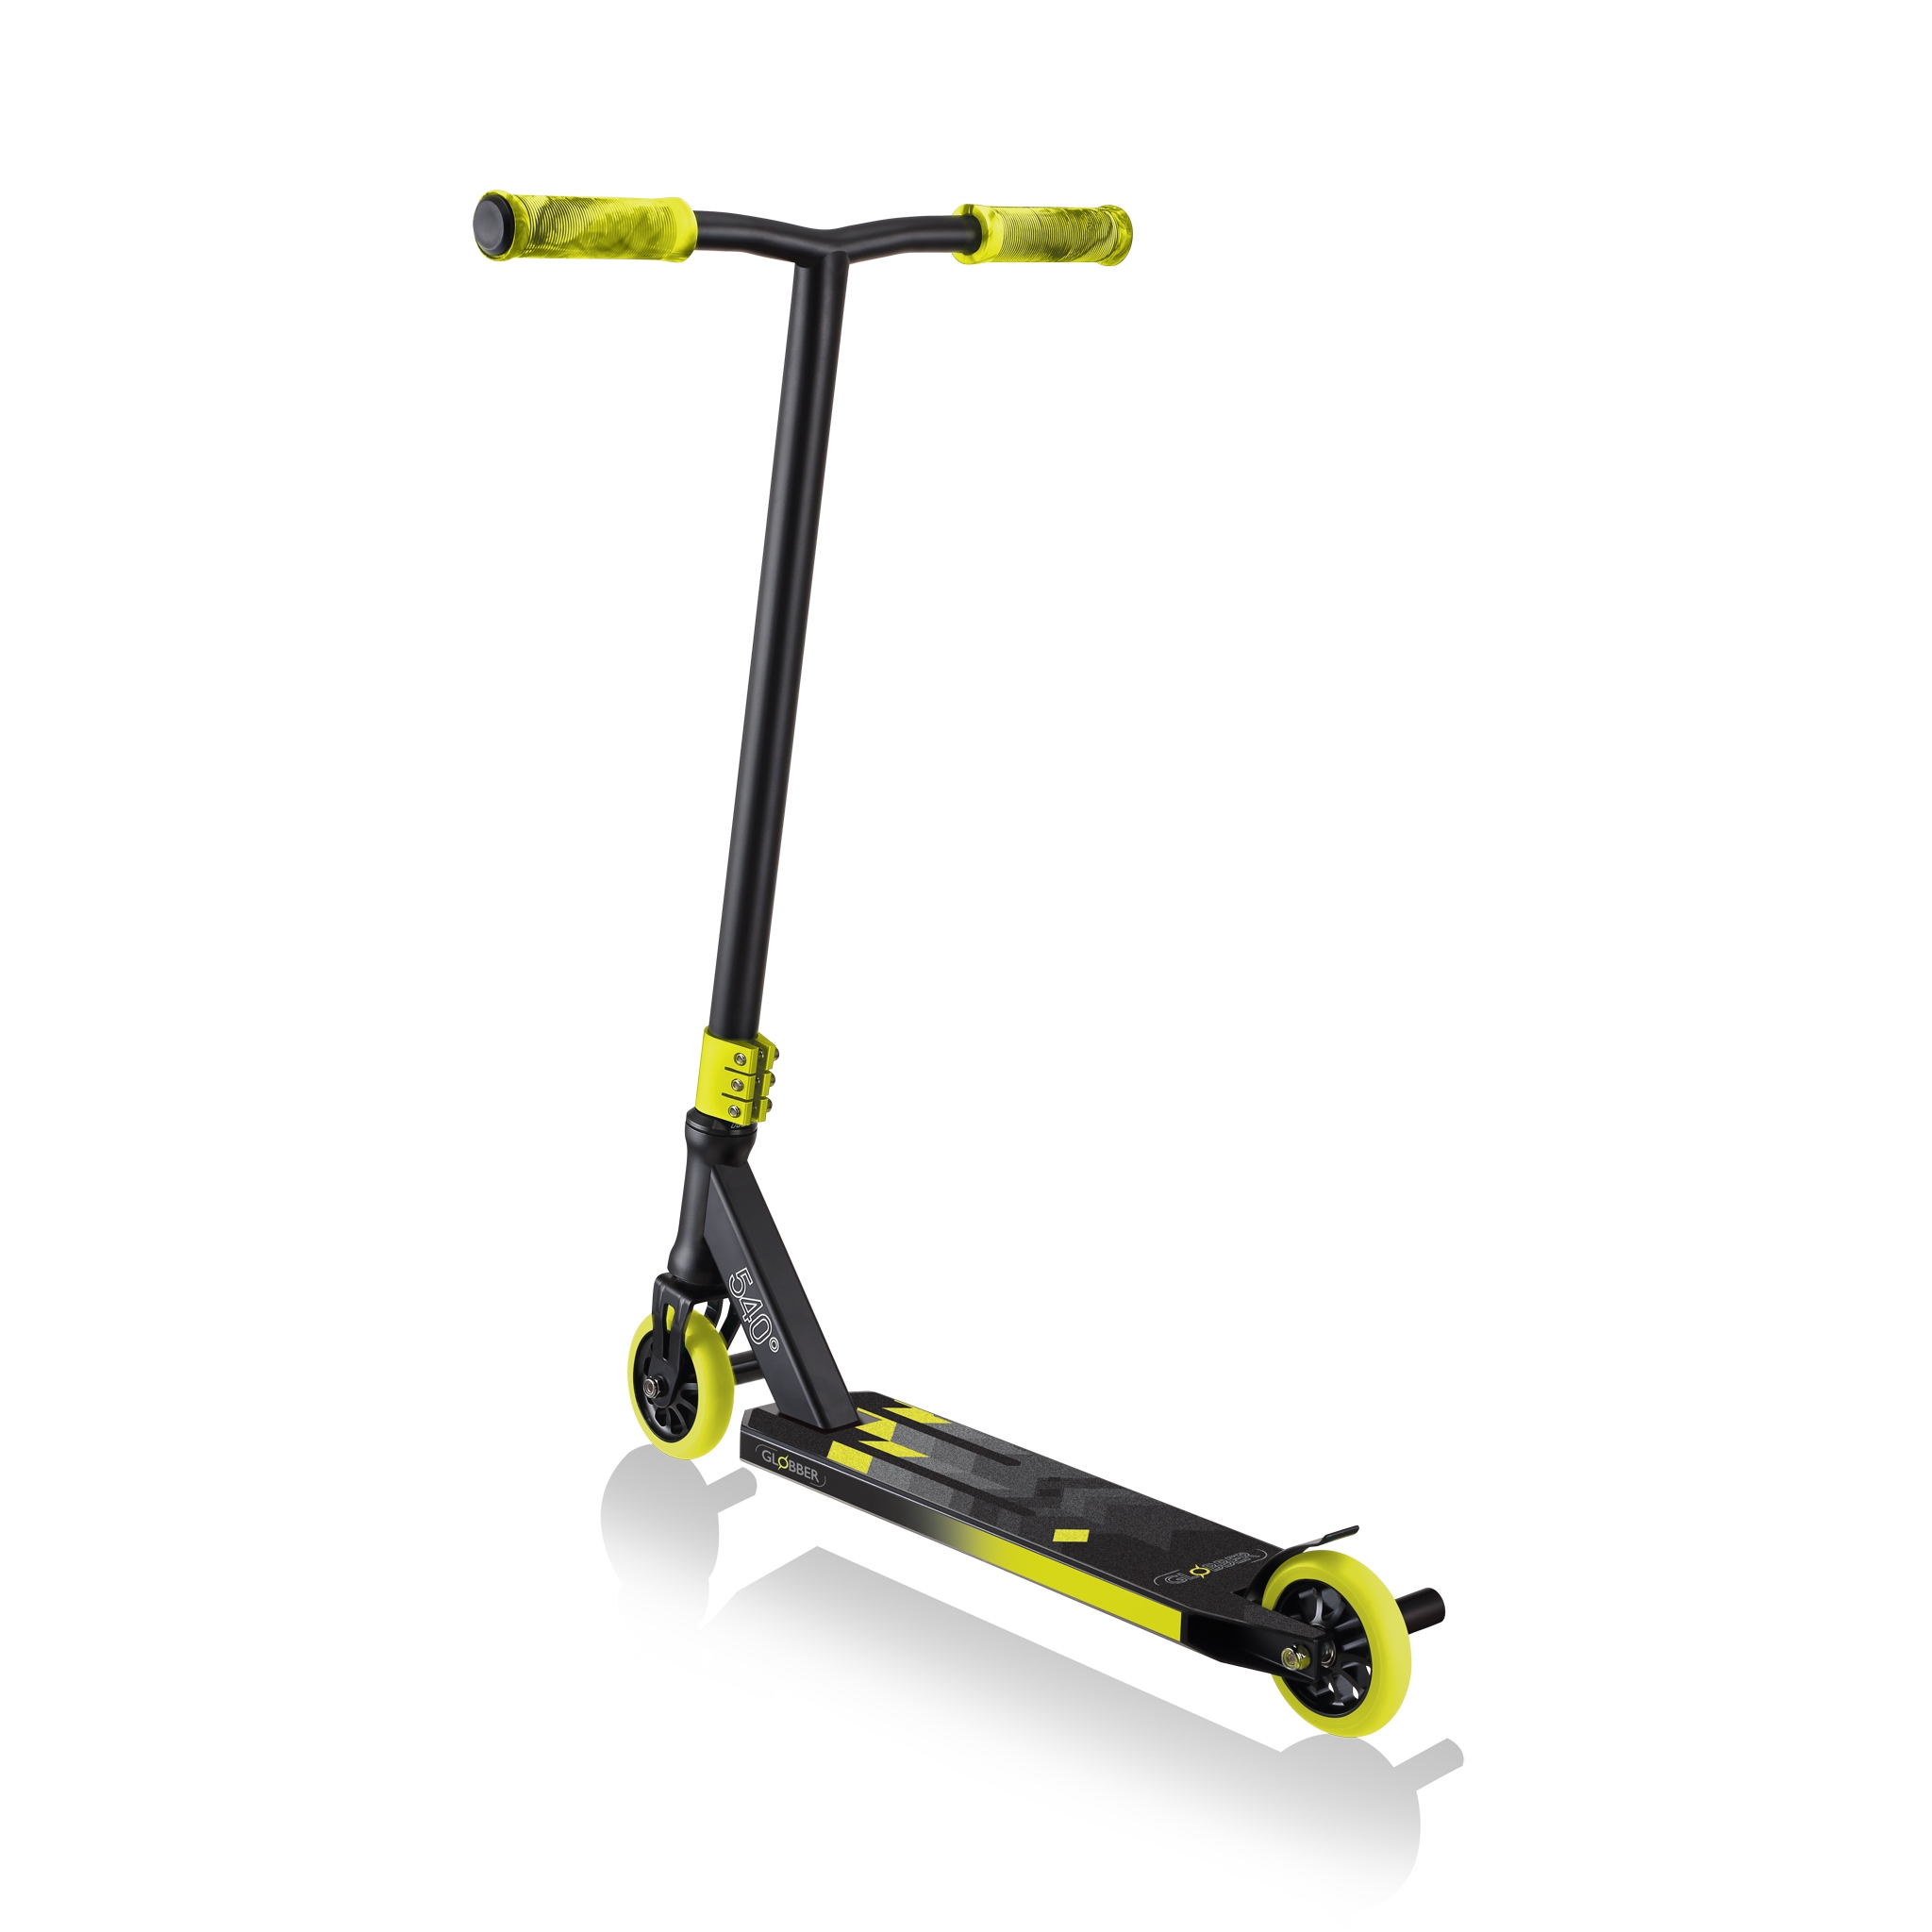 stunt-scooter-with-stunt-pegs-Globber-GS540 5